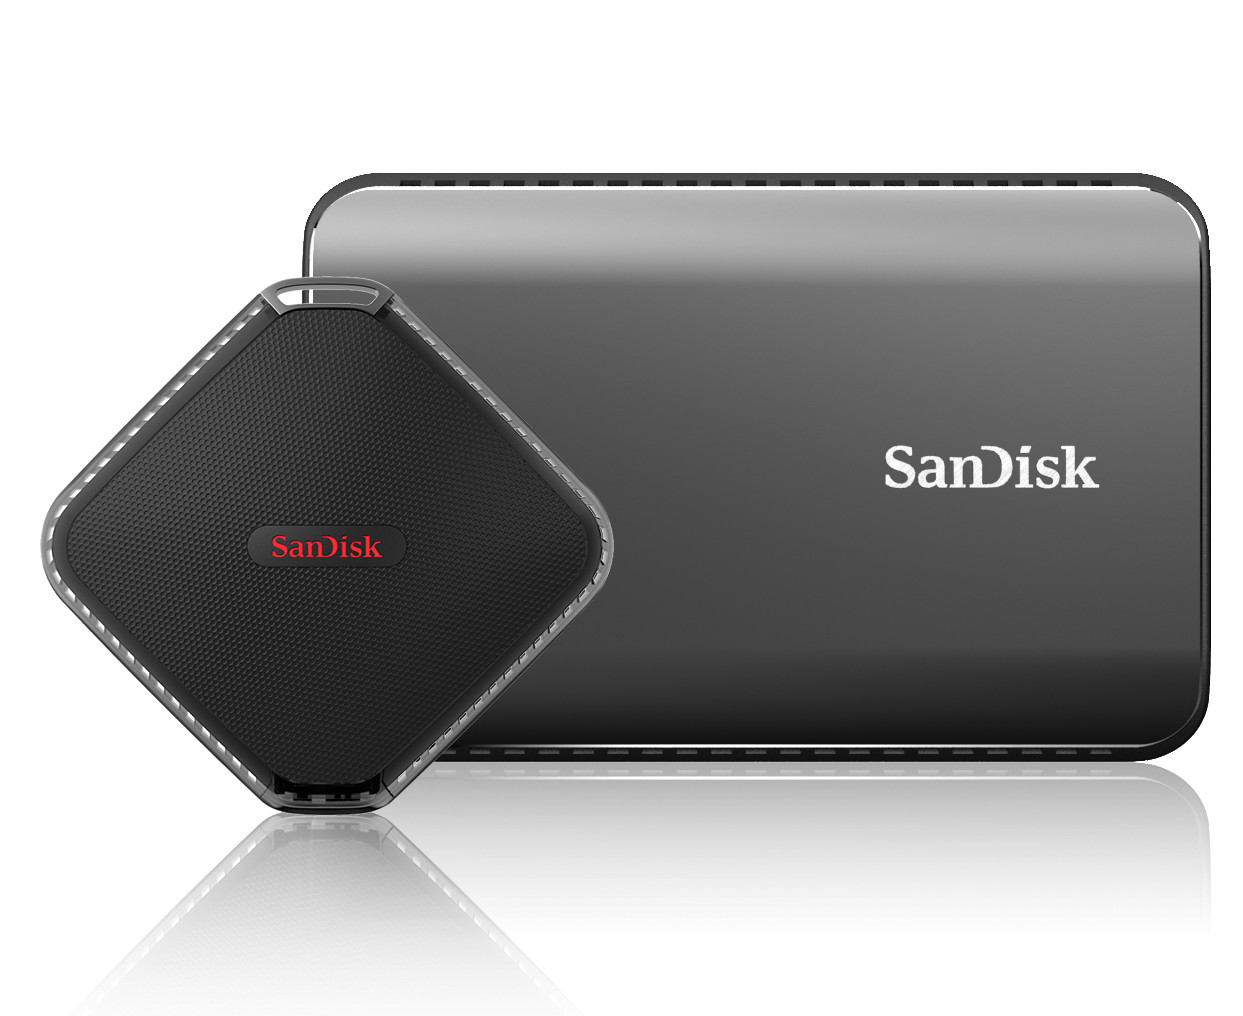 SanDisk Extreme 500 Portable USB 3.0 SSD review